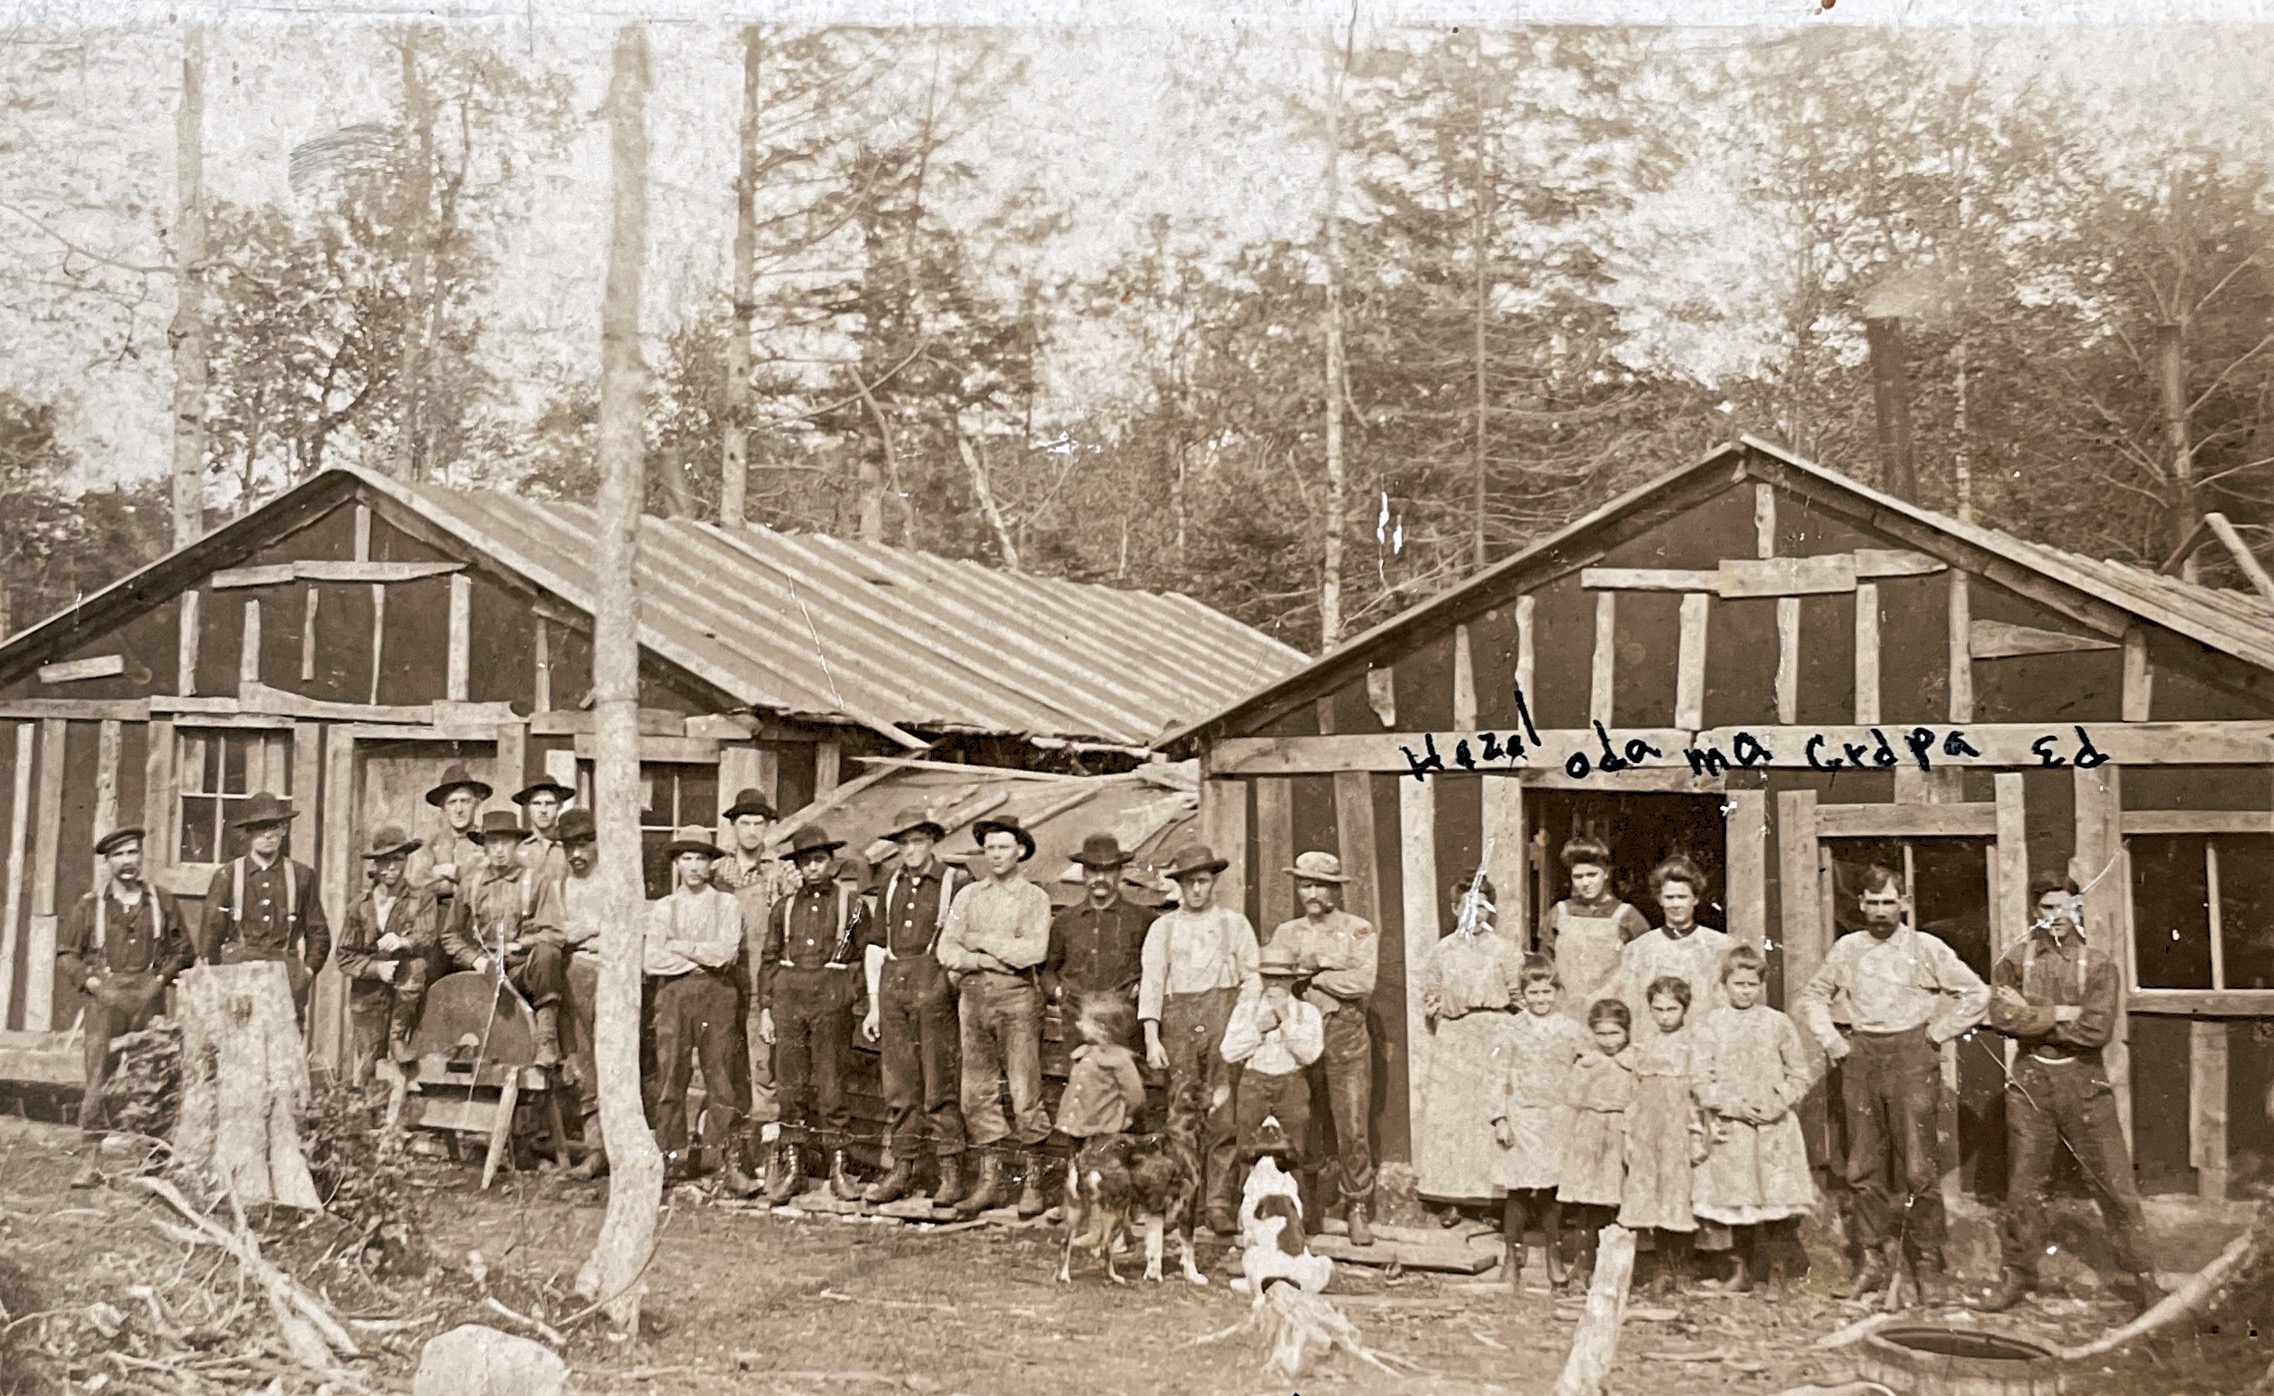 Great Great Grandpas houses at Minors camp near Rexton.  Adelphus David Minor, born February 18, 1868, Quebec, Canada. Does September 5, 1927.  1905 - Barn for 5 cows, 12 team horses, dining hall seats 80 men, cooks shanty, office where sold groceries, tobacco, etc. black smith shop where shoes horses, and ice house, chicken coop